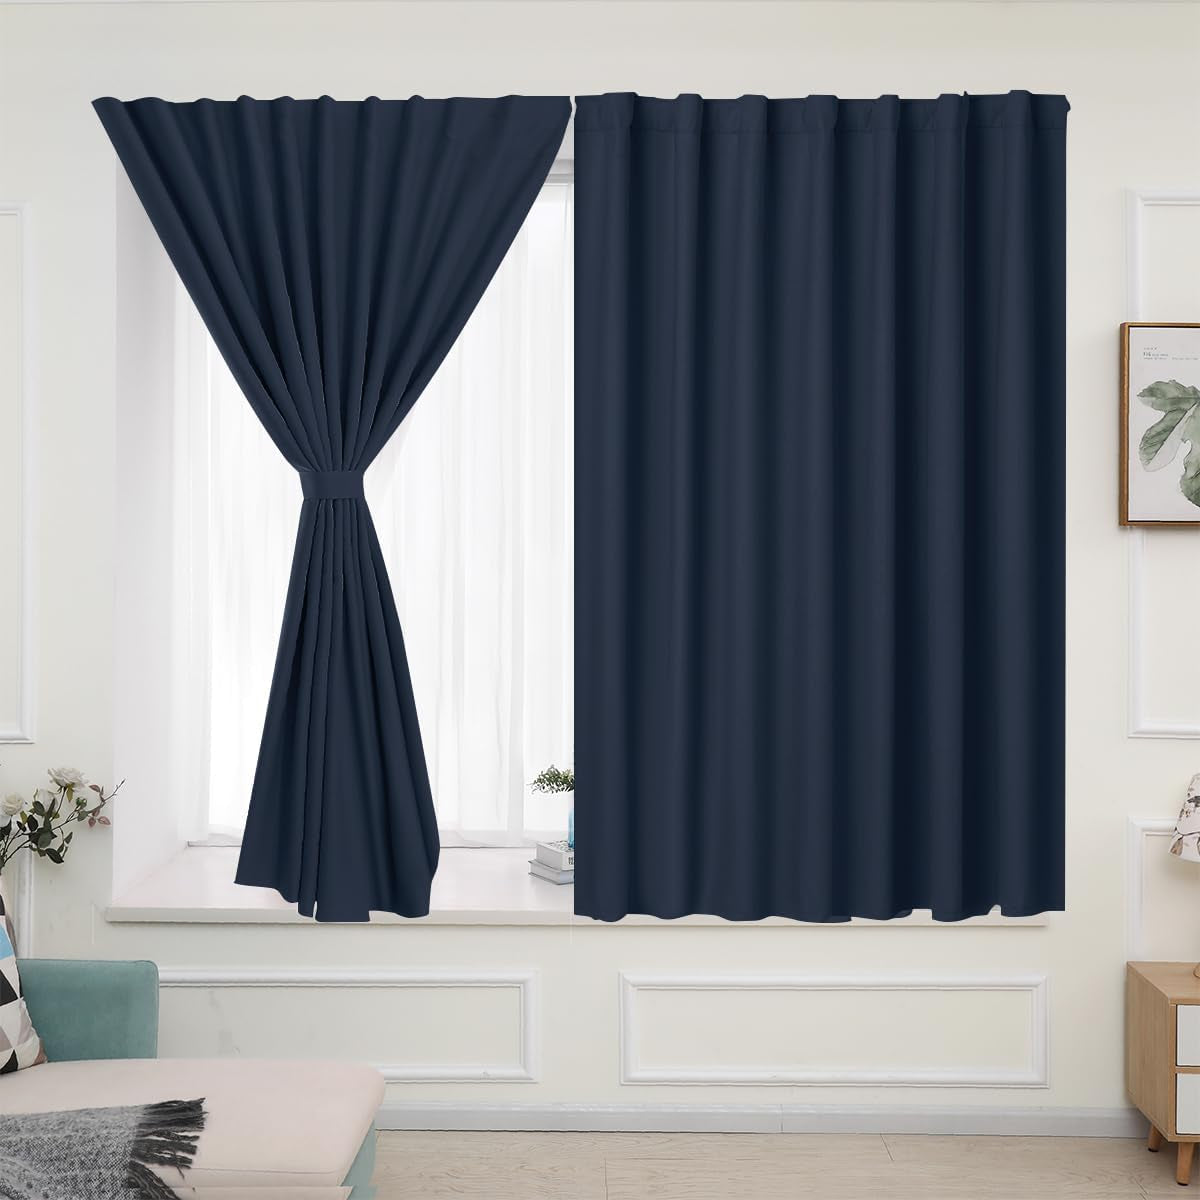 Muamar 2Pcs Blackout Curtains Privacy Curtains 63 Inch Length Window Curtains,Easy Install Thermal Insulated Window Shades,Stick Curtains No Rods, Black 42" W X 63" L  Muamar Navy Blue 42"W X 63"L 